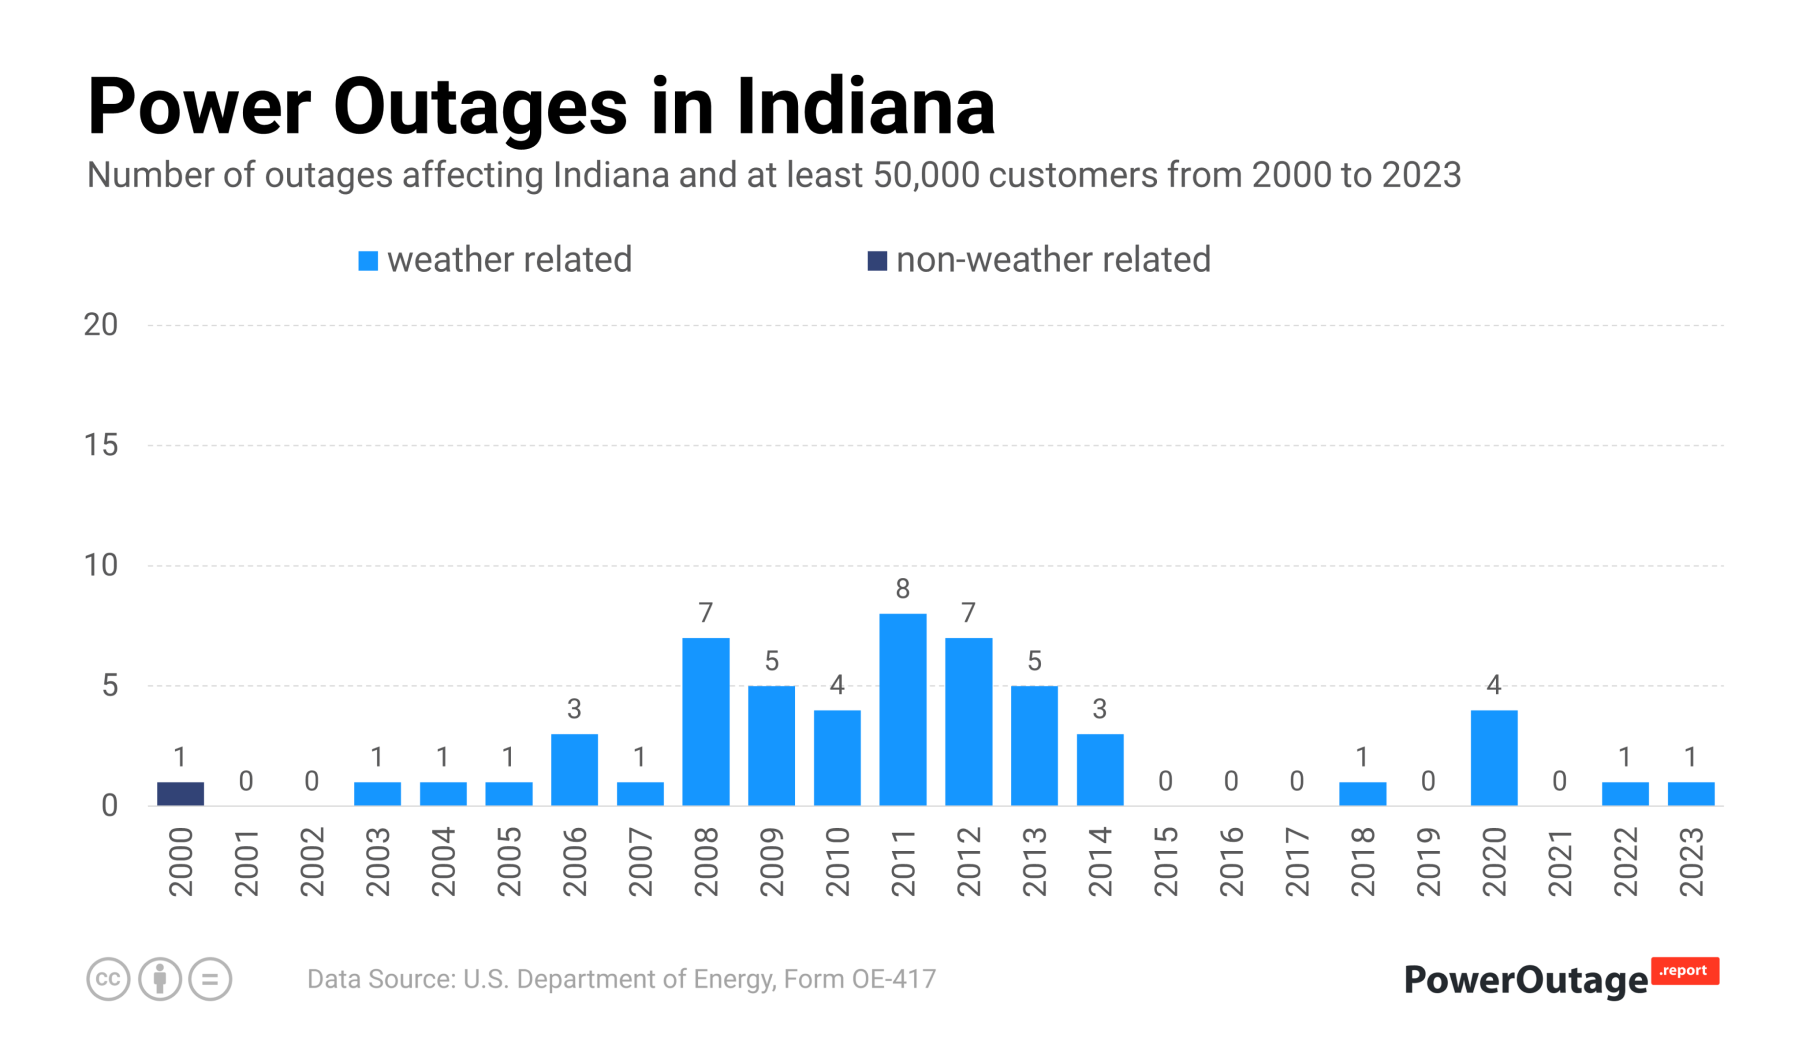 Indiana Power Outage Statistics (2000 - 2021)